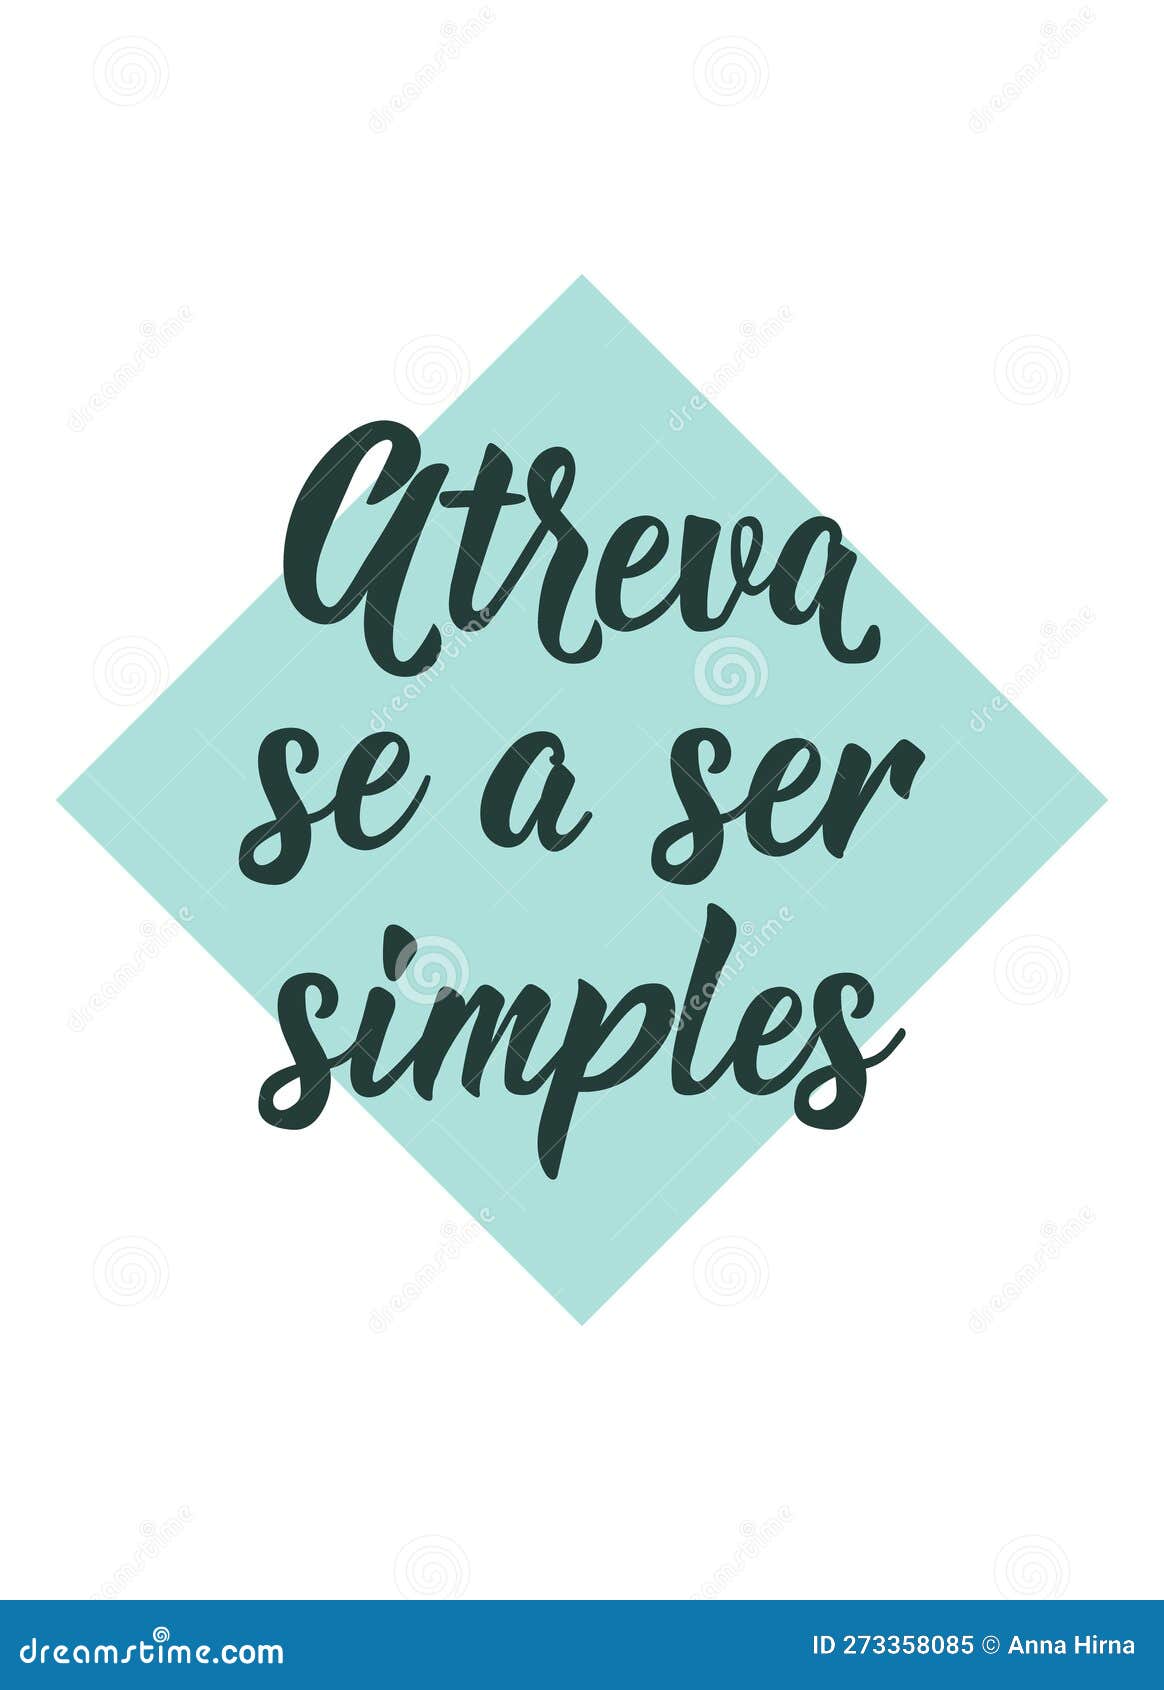 dare to be simple in portuguese. ink  with hand-drawn lettering. atreva se a ser simples